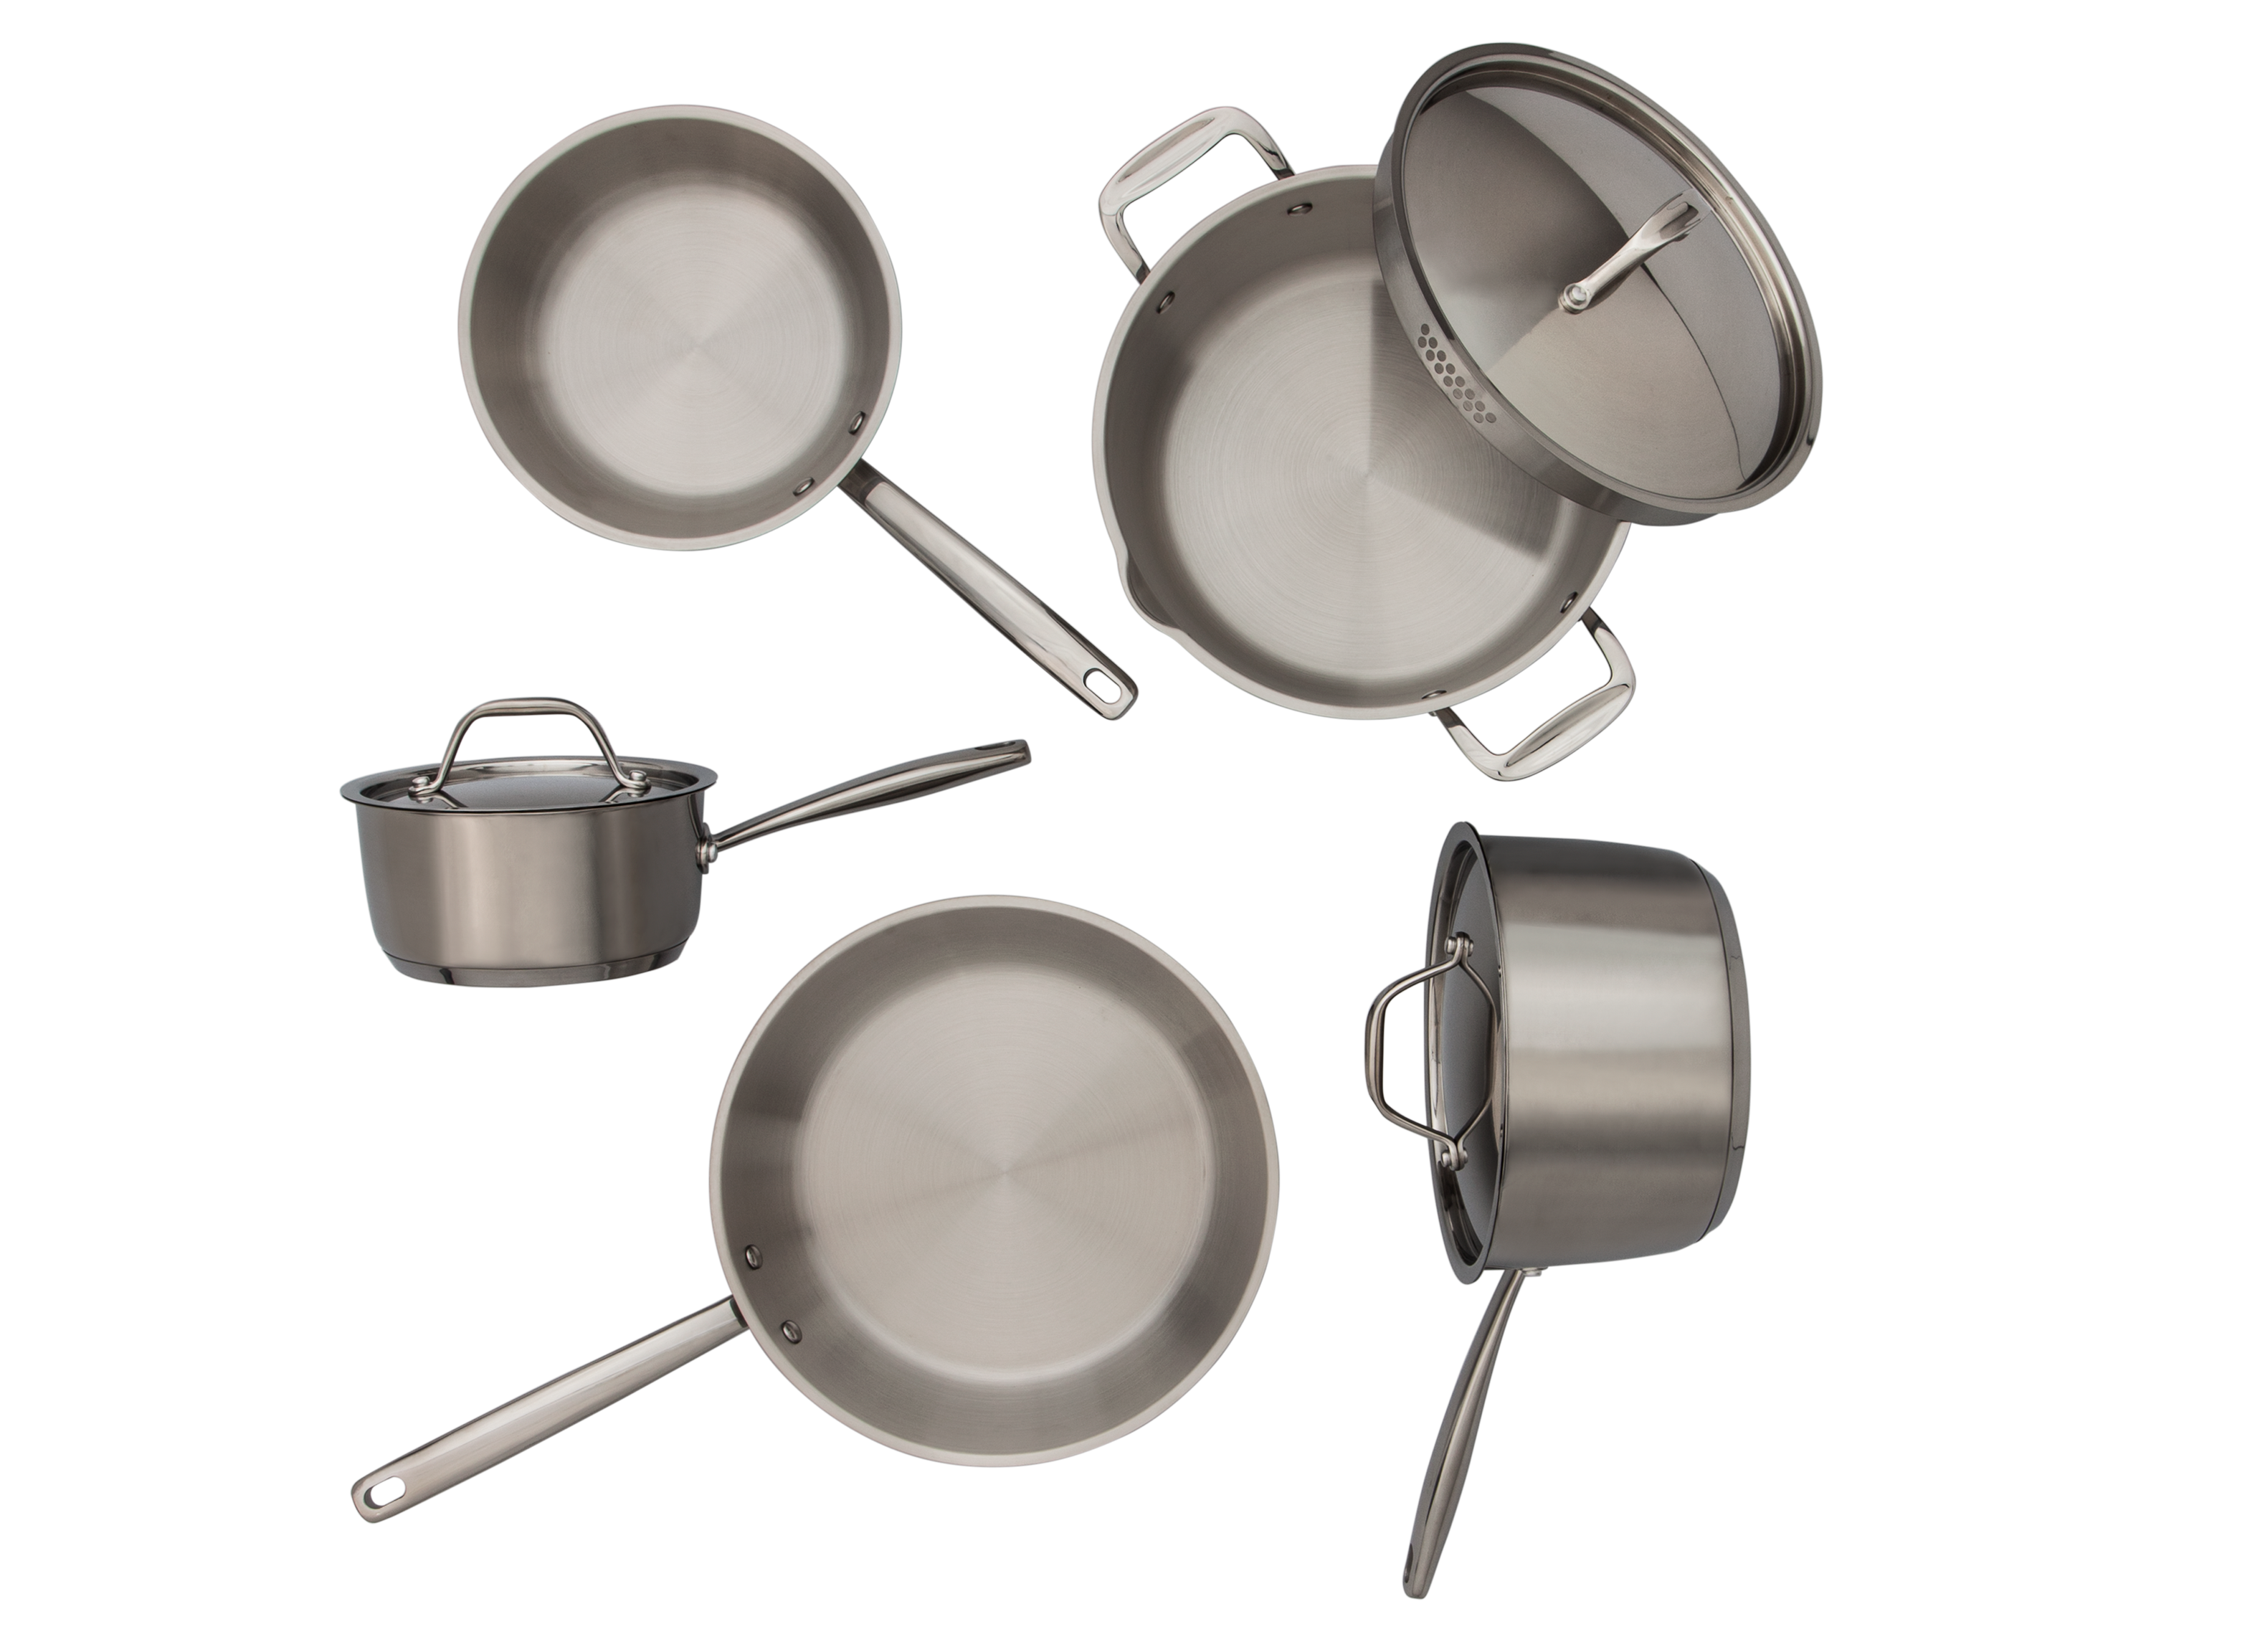 https://crdms.images.consumerreports.org/prod/products/cr/models/397342-uncoated-cookware-made-by-design-target-10002104.png